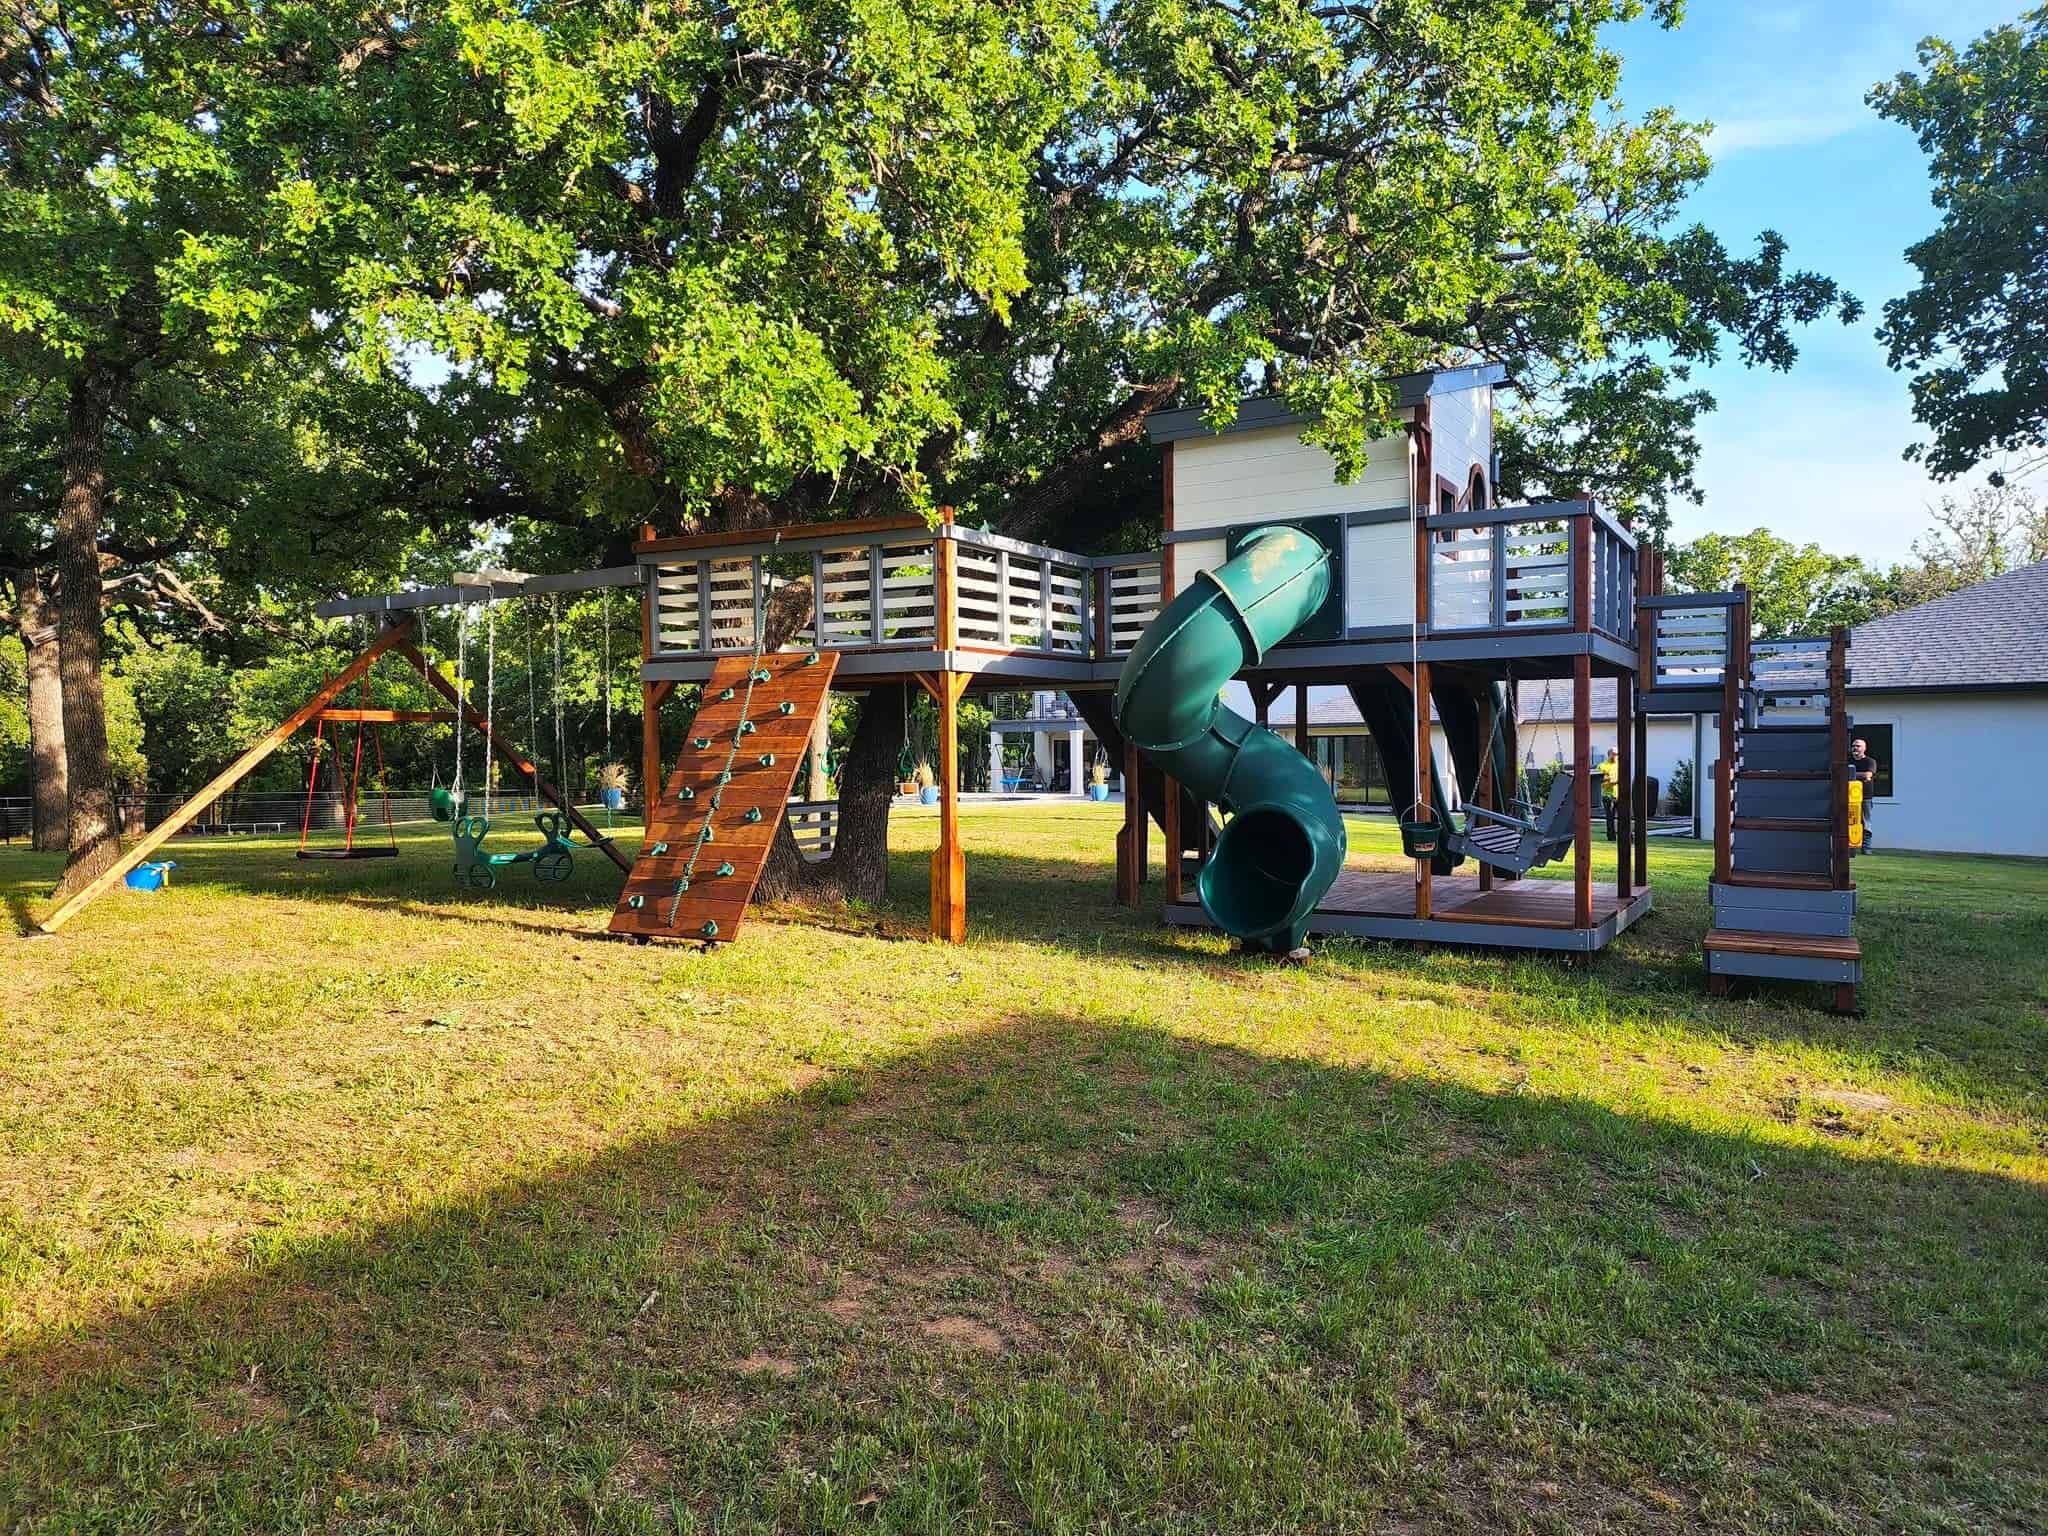 modern swing set, kids fun spiral slide, rock climbing wall with rope, swings including adult porch swing